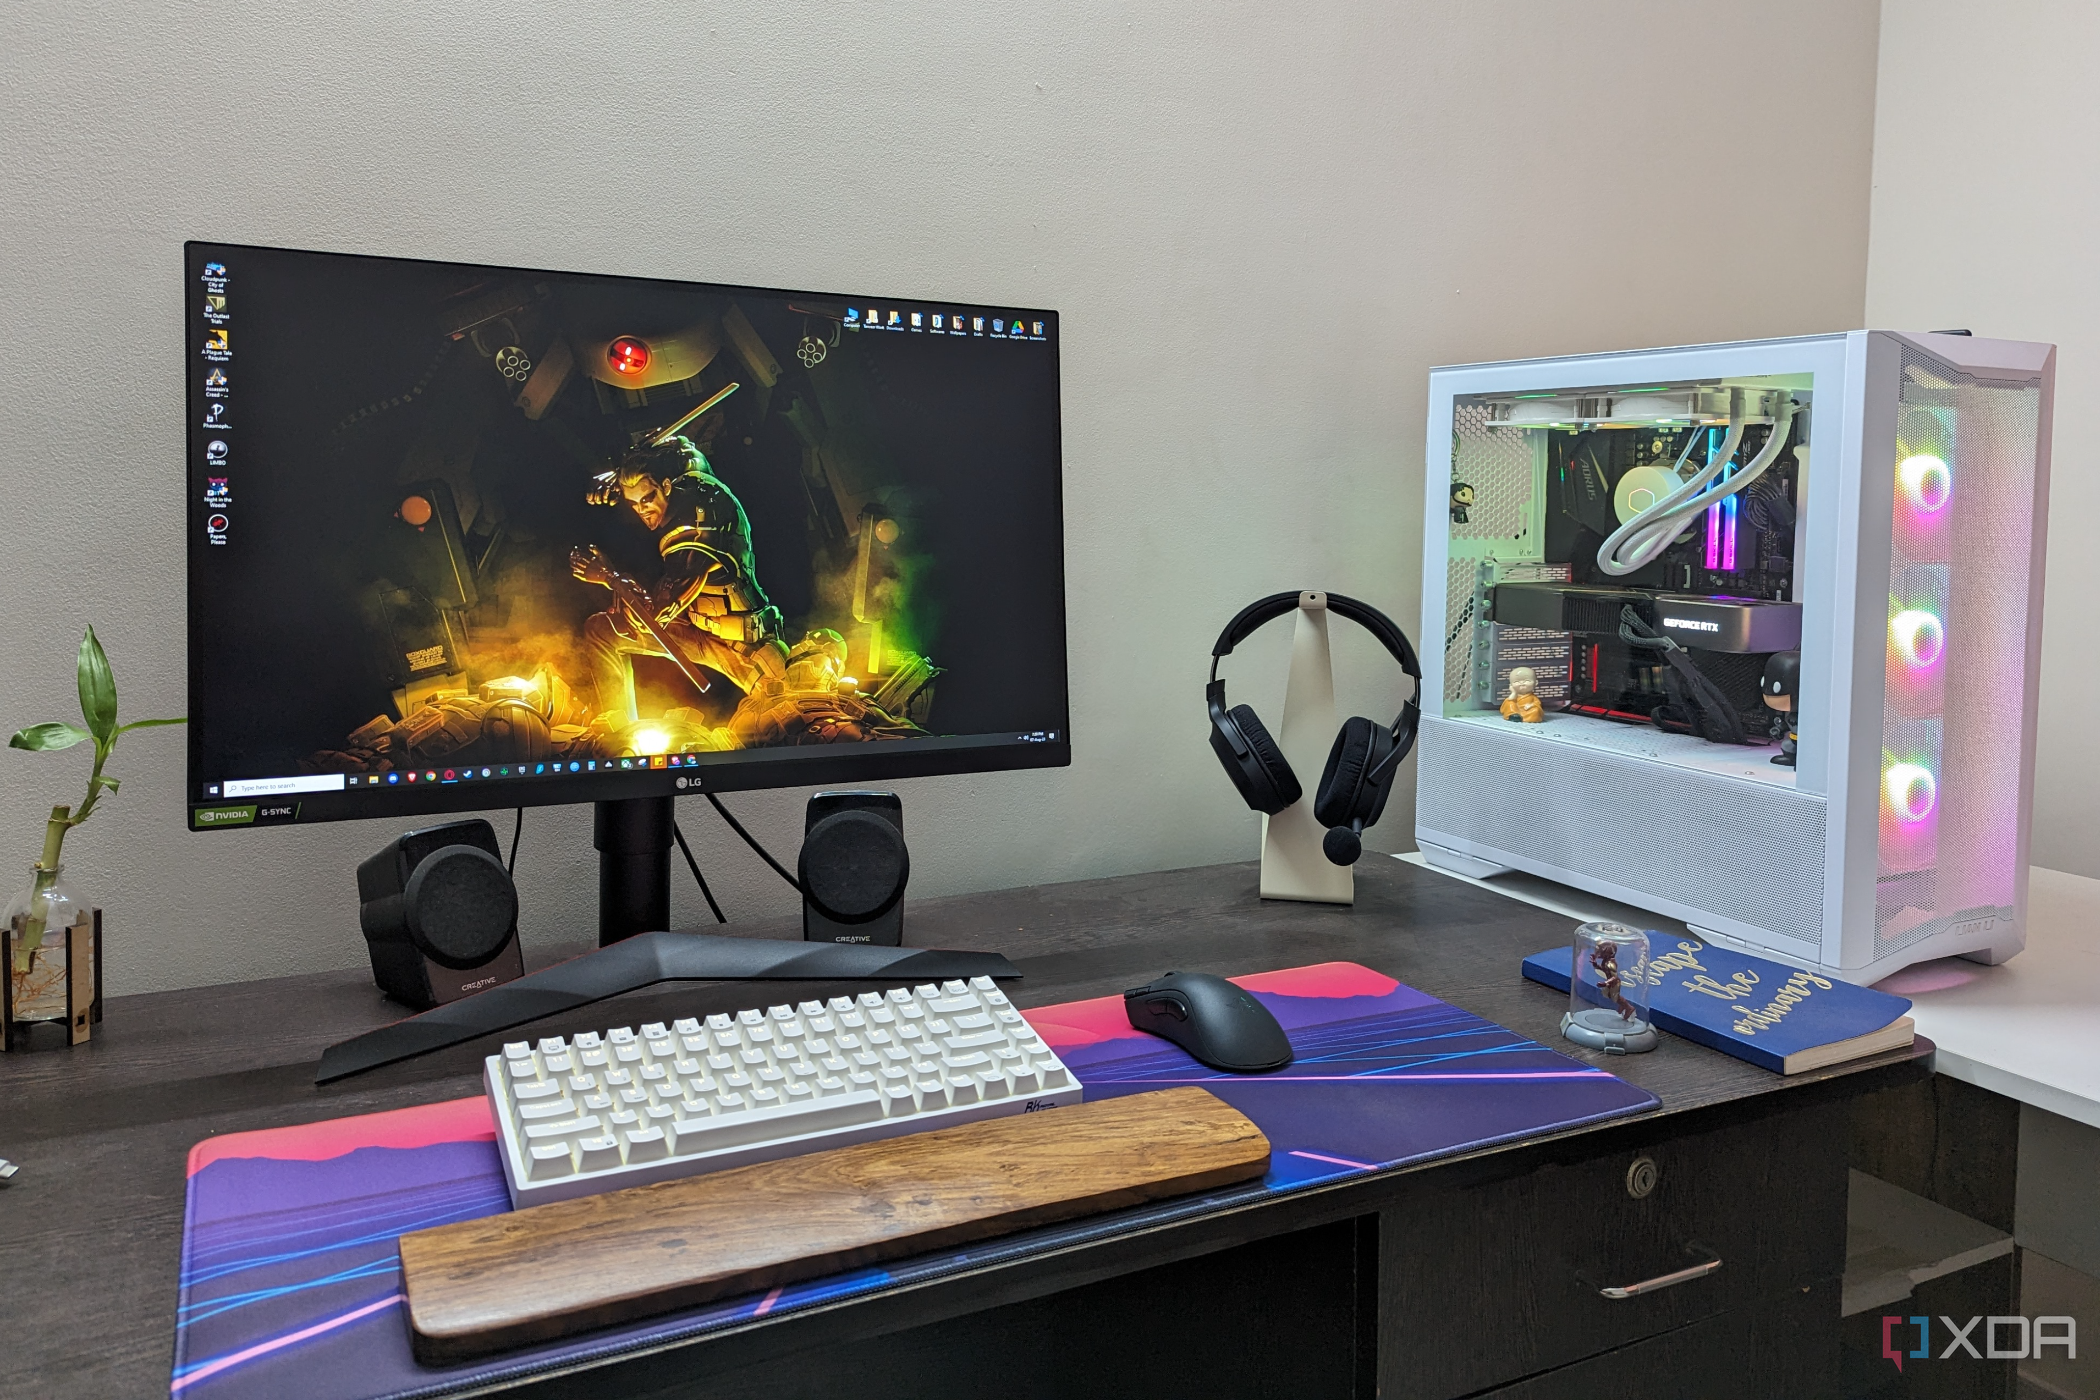 Desktop PC setup showing a gaming PC, monitor, keyboard, mouse, and headset